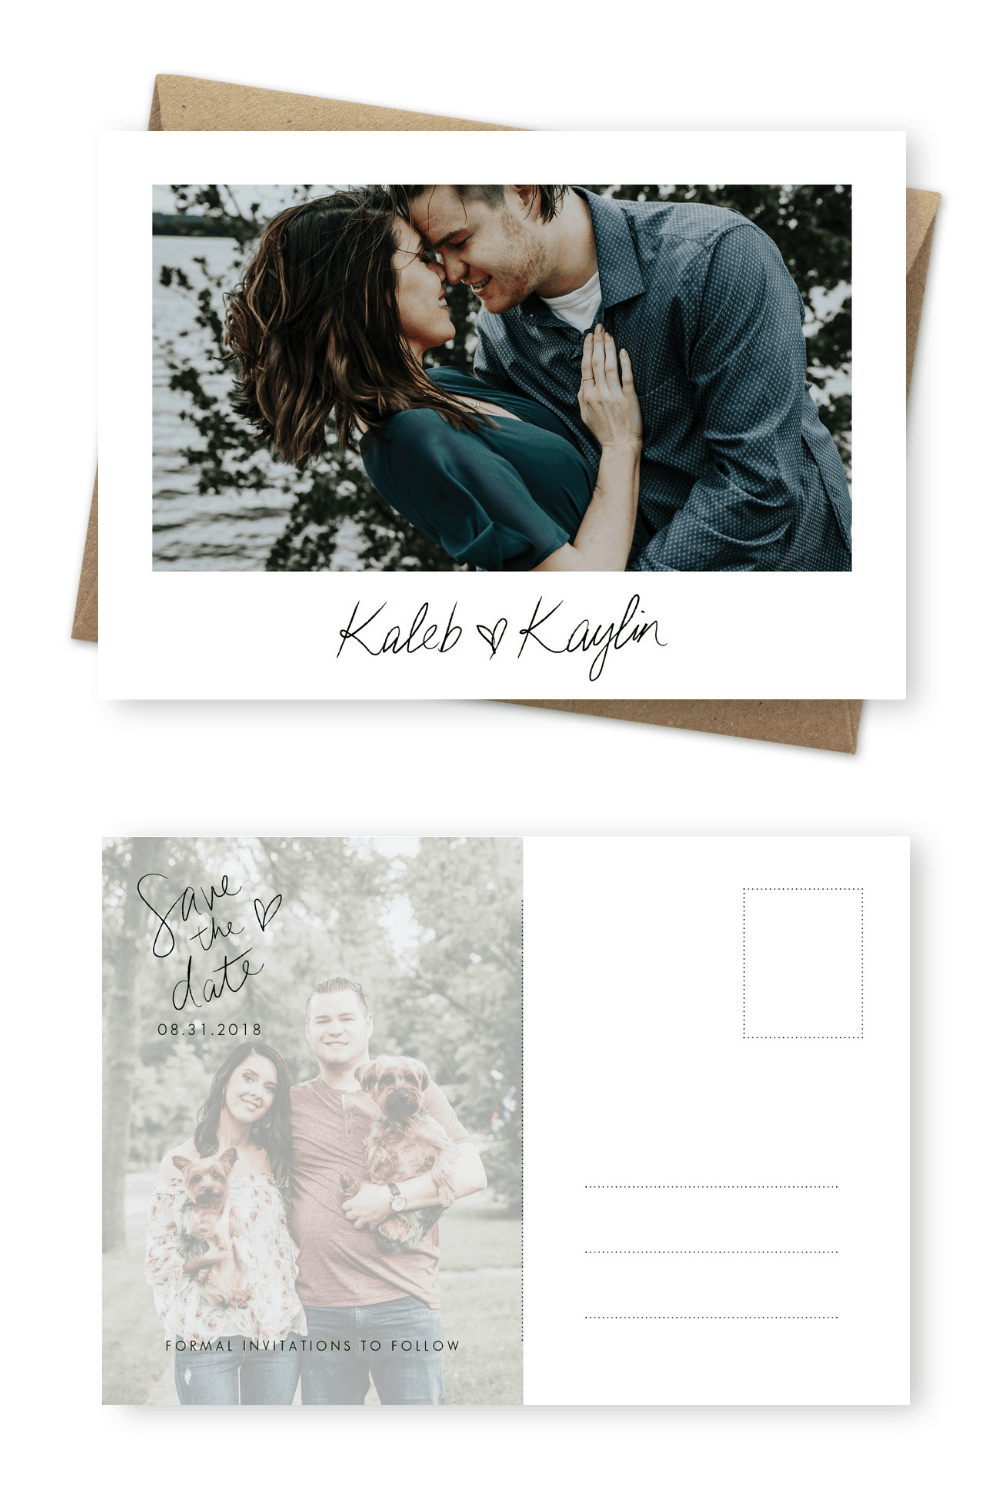 Wedding Save the Date Cards Sydney Photo Save the Date Postcards For the Love of Stationery 2